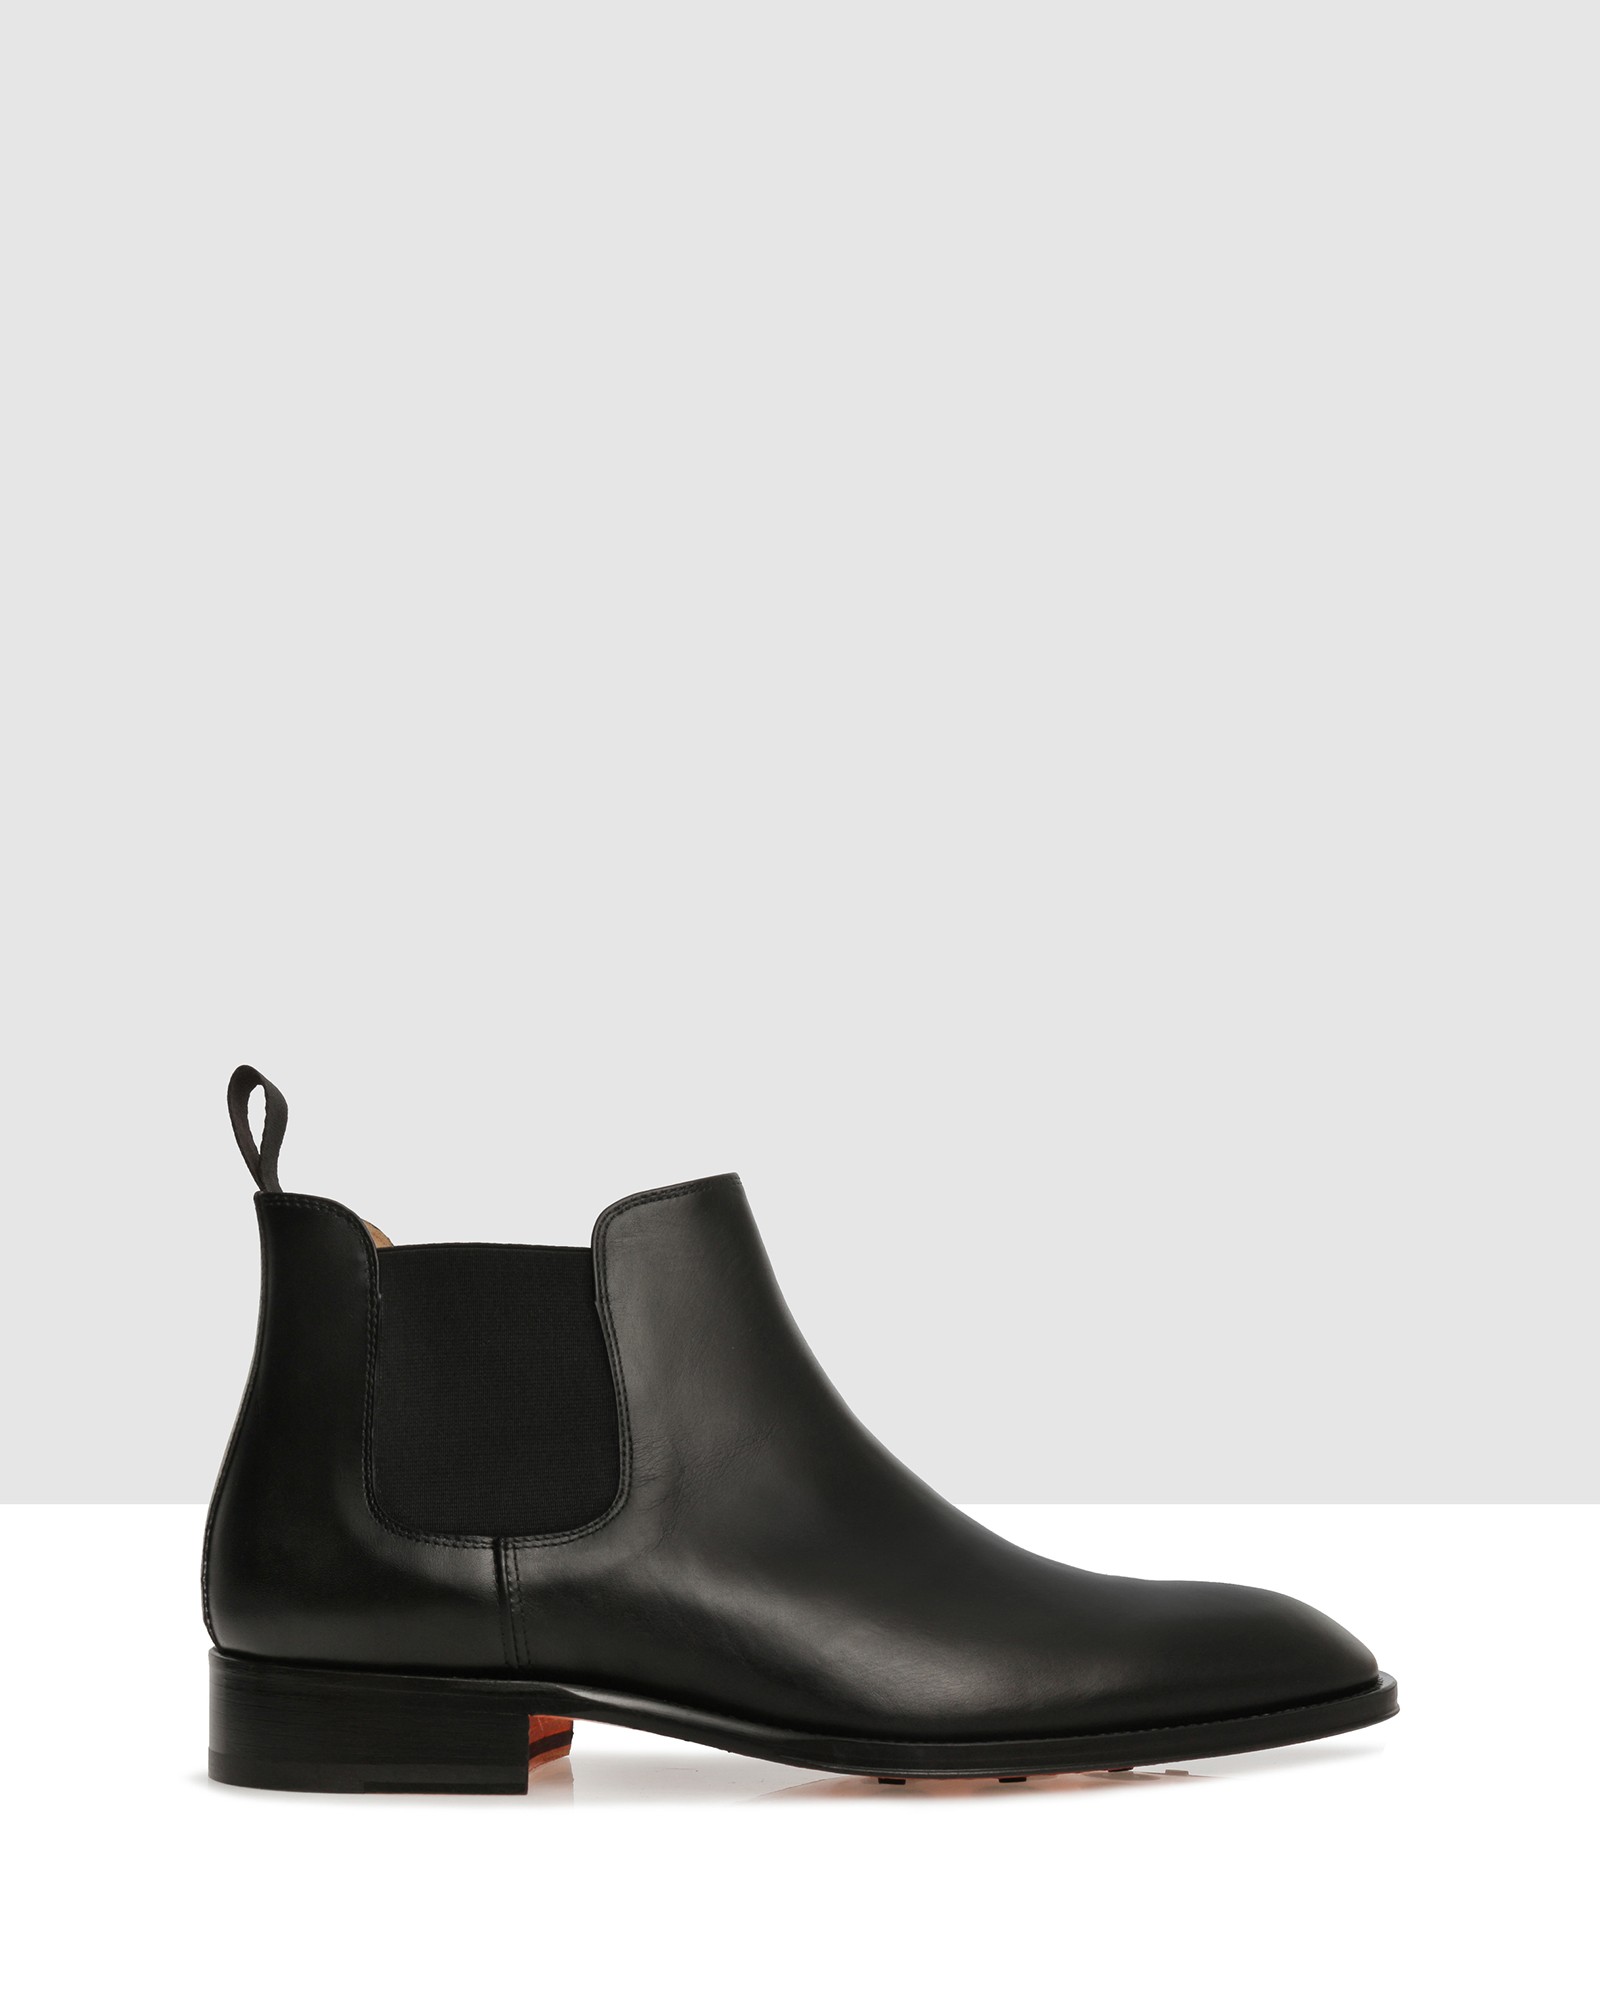 Chelsea Boots Black by Brando | ShoeSales